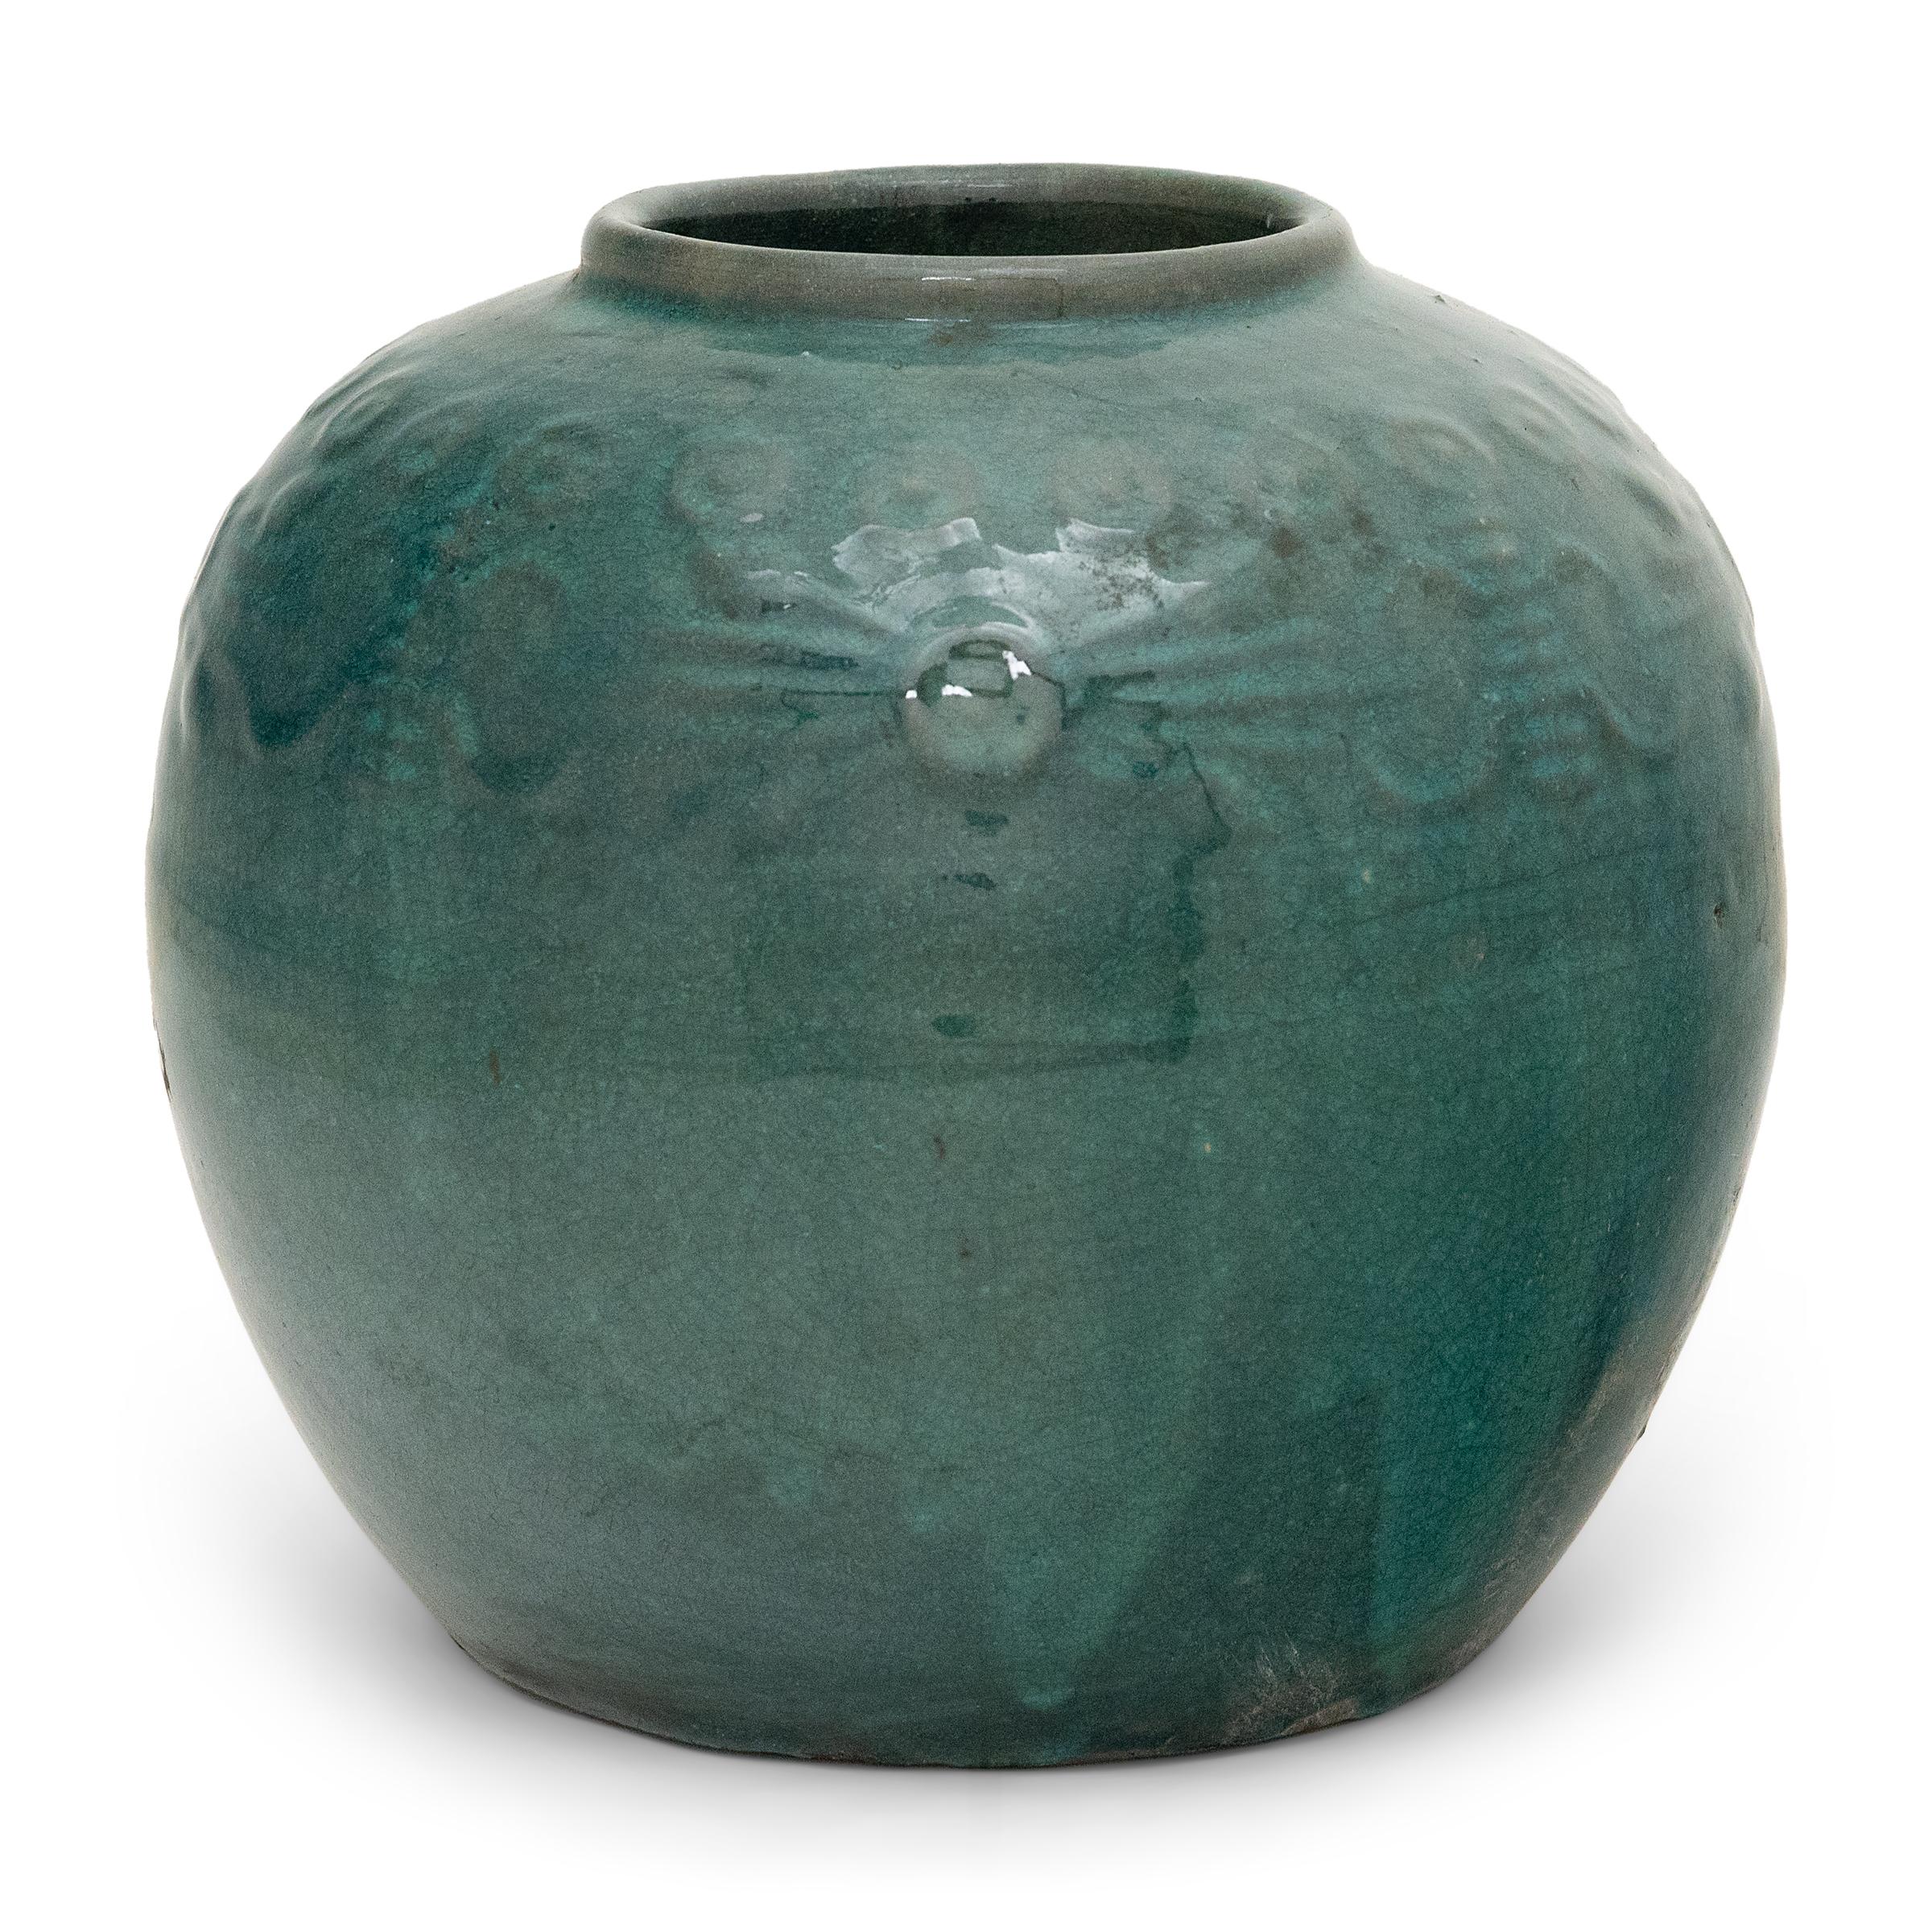 A glassy, blue-green glaze gracefully drips across the rounded body of this provincial kitchen pot, lingering beautifully on the low relief decoration to the jar's shoulders. Among the raised patterns are round chrysanthemum blossoms and stylized